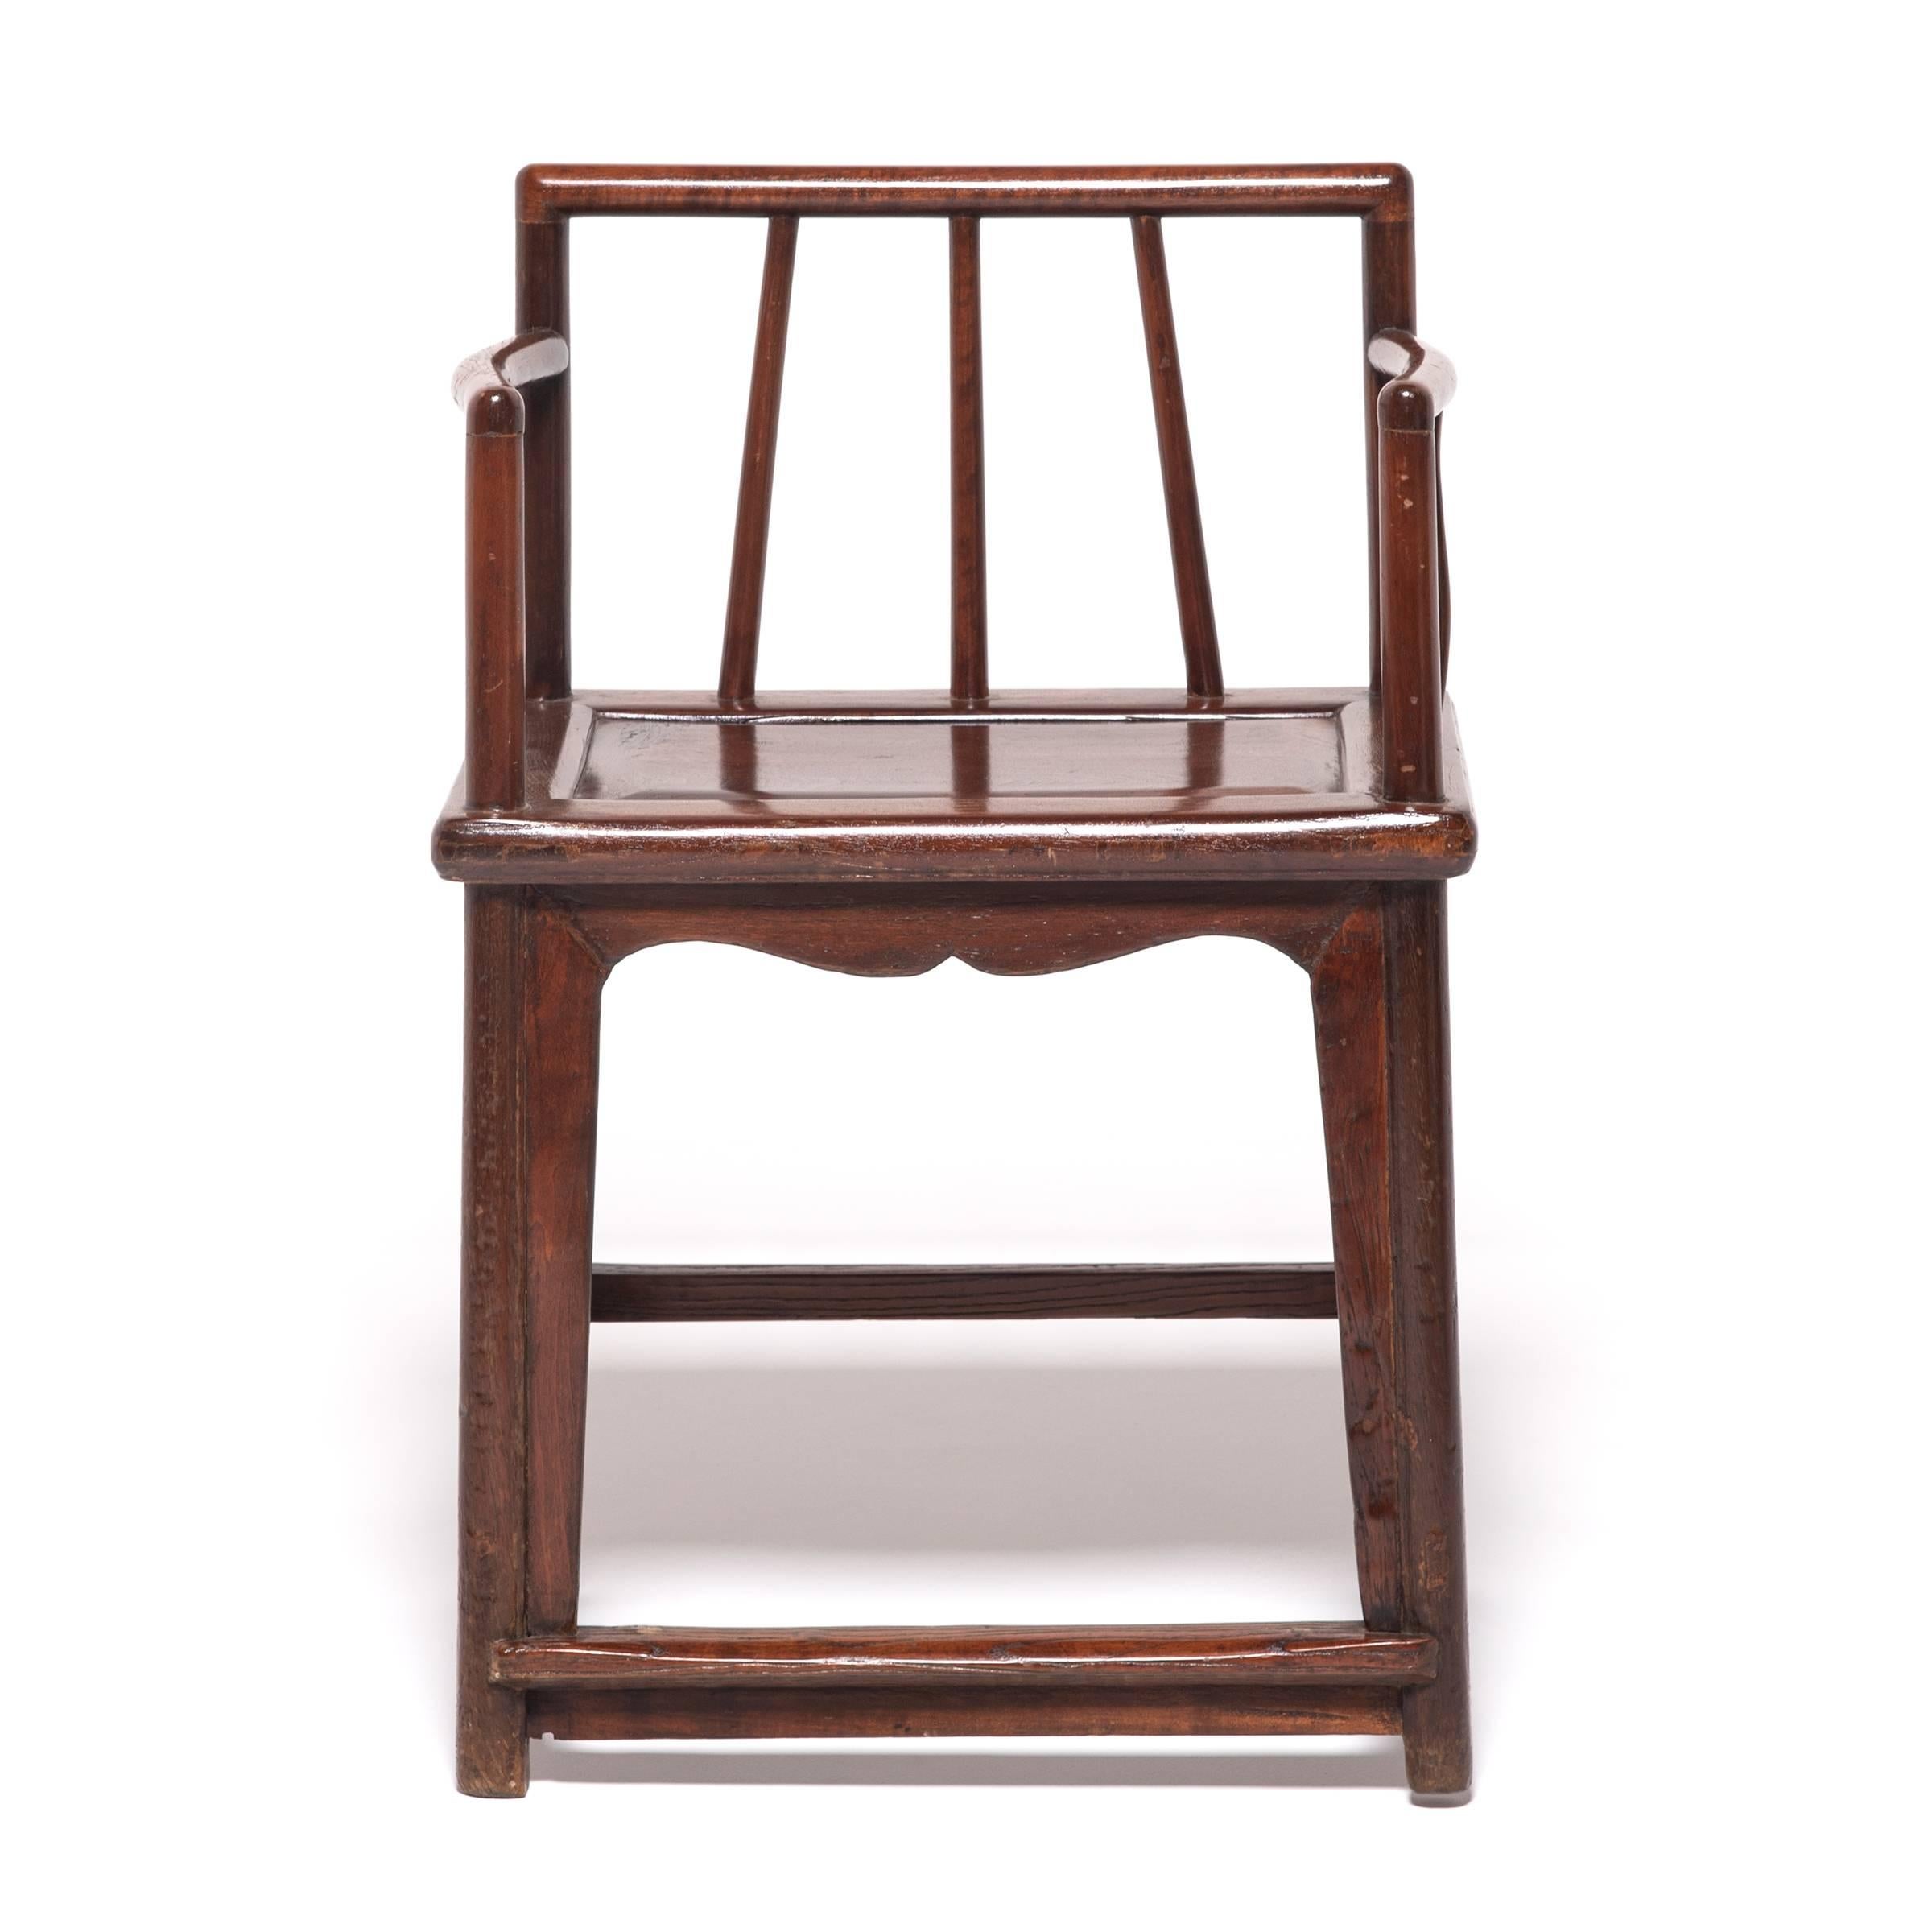 These 19th century spindleback armchairs owe their graceful design to the styles and techniques that emerged during the Ming dynasty, the golden age of Chinese furniture design. Constructed with mortise-and-tenon joinery, these walnut chairs are an